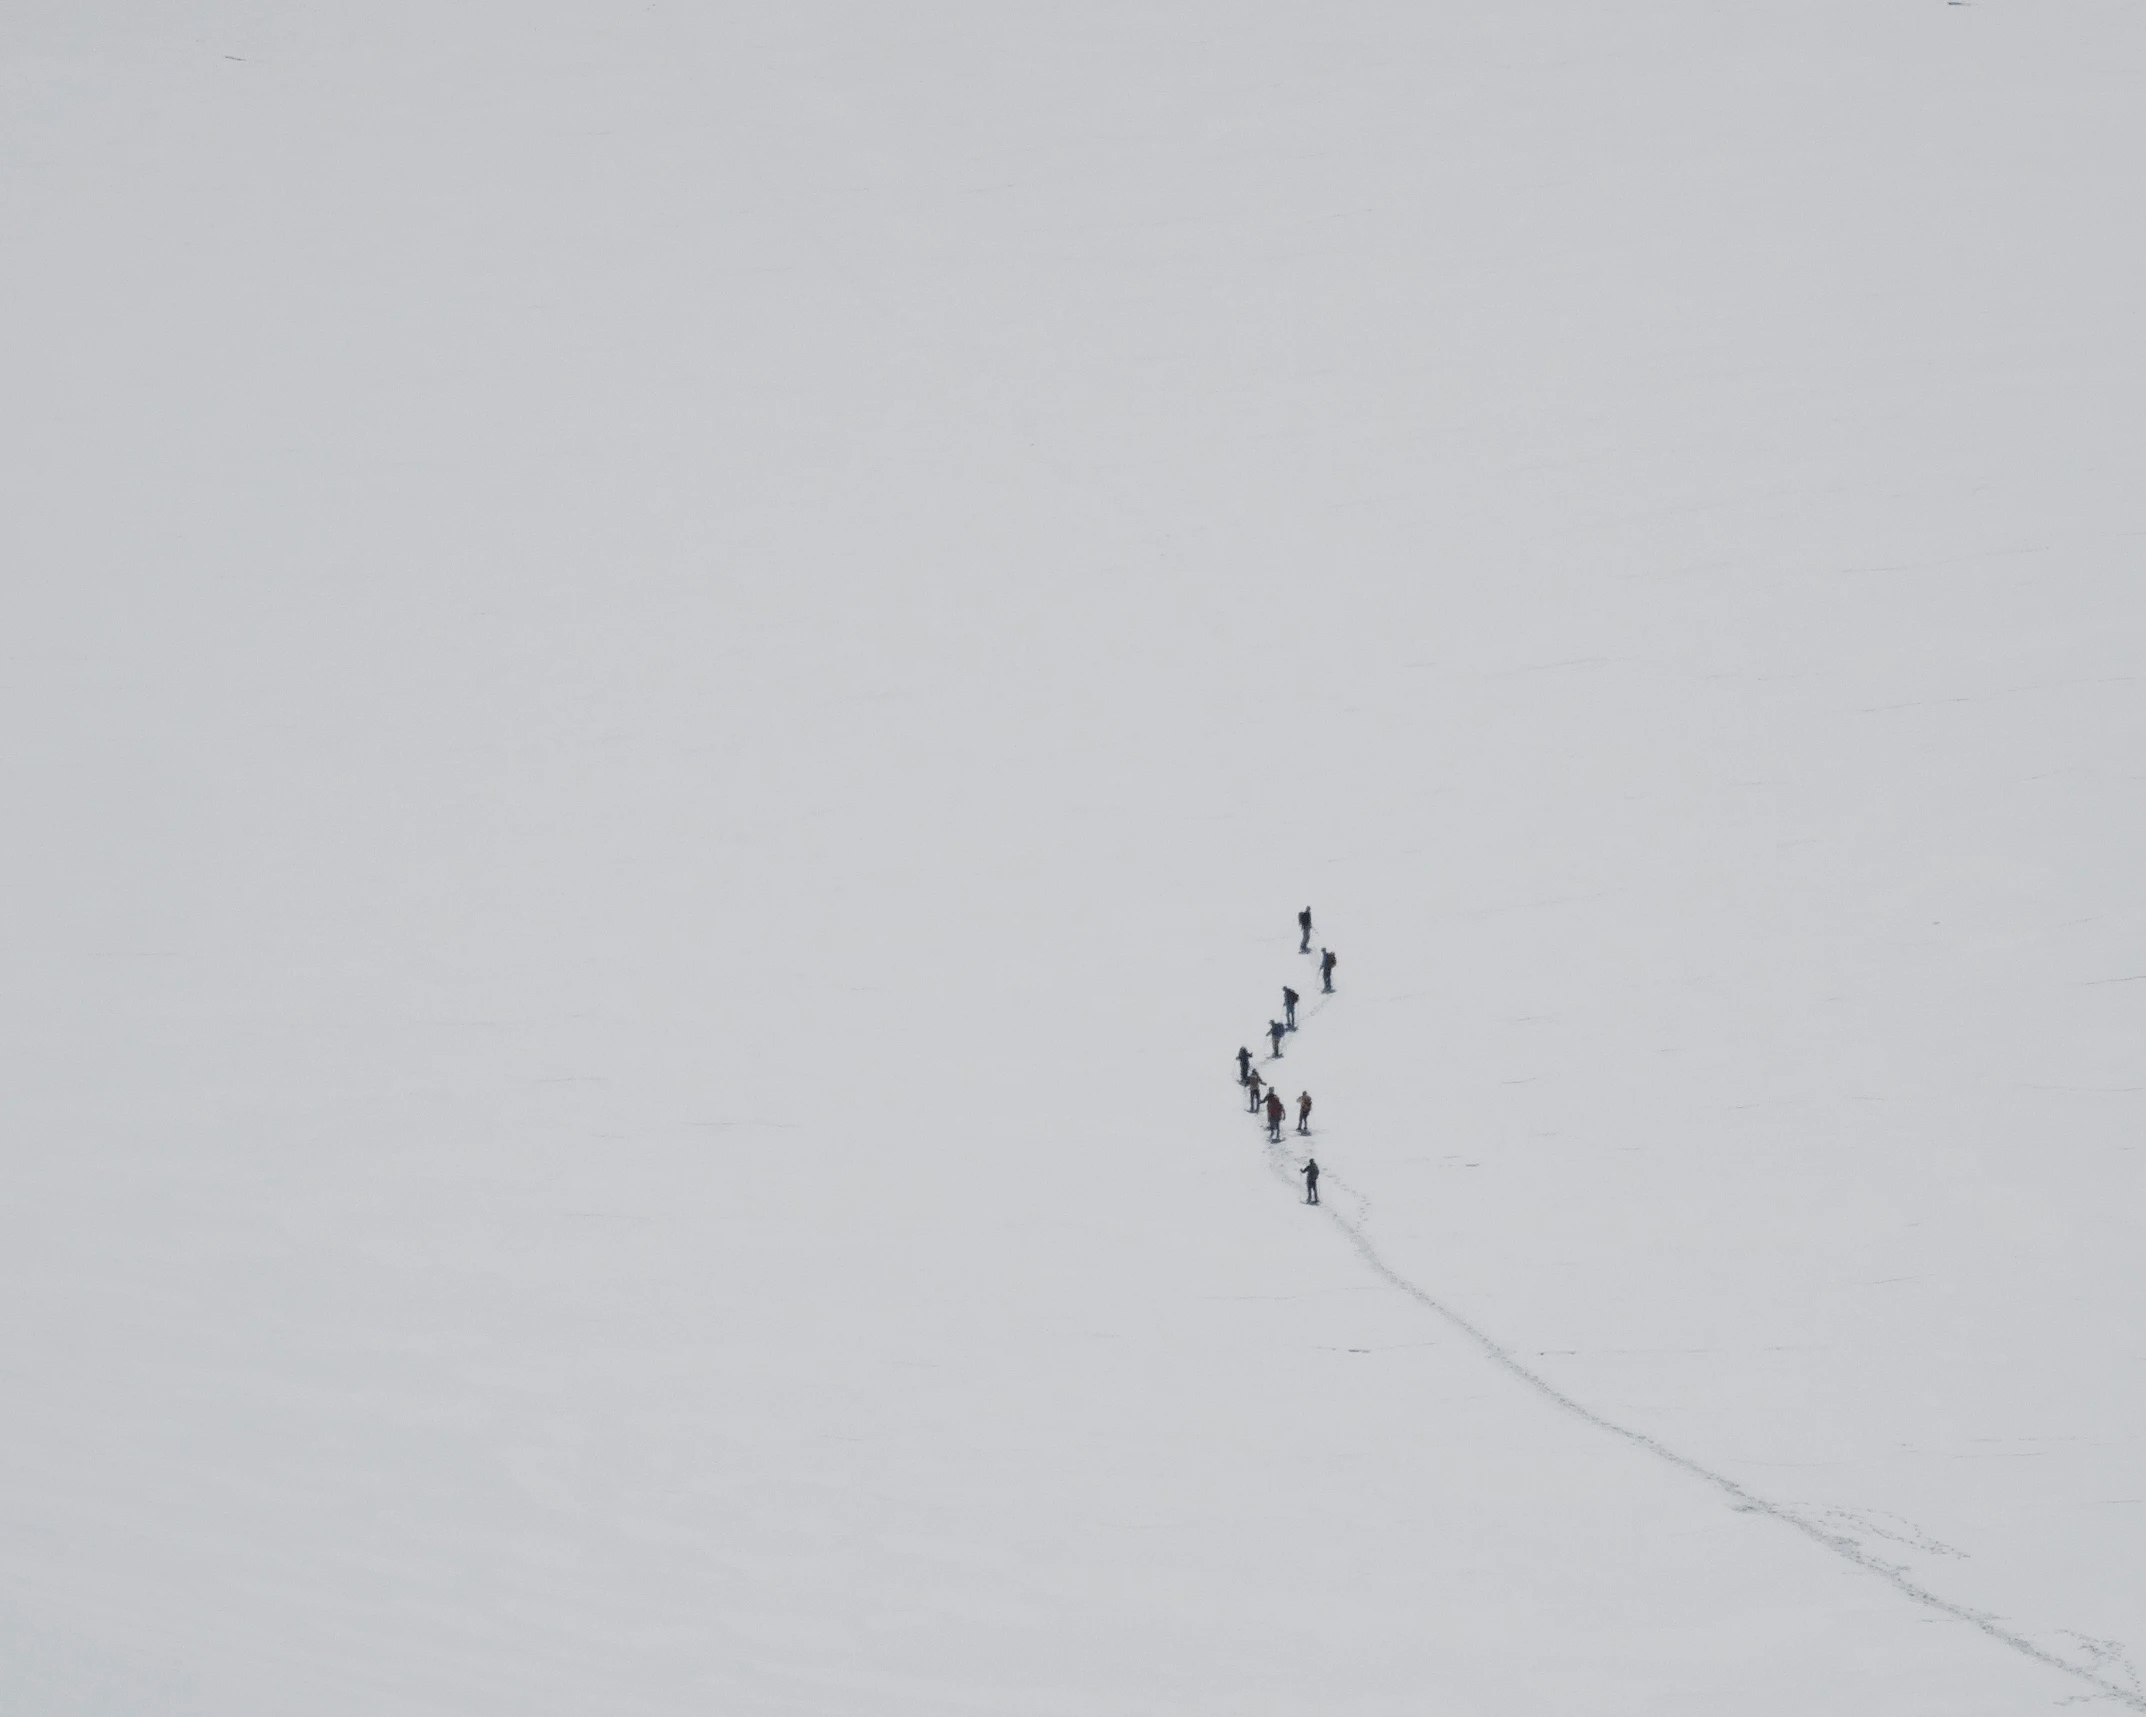 there are people standing in the snow on a trail